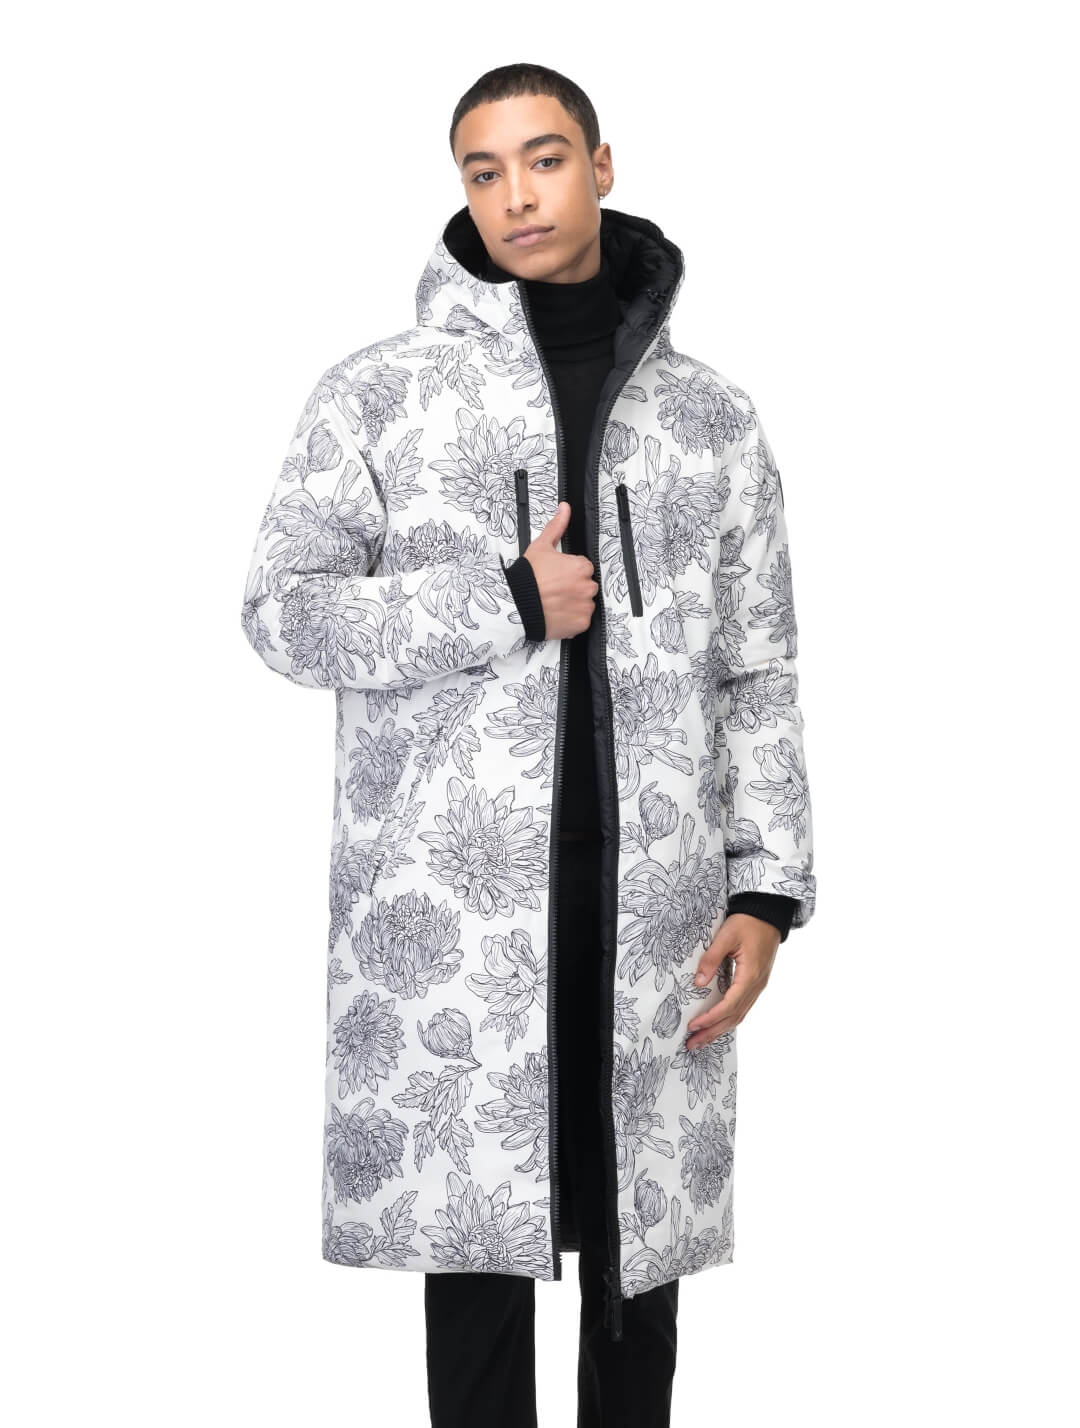 Men's knee length reversible down-filled parka with non-removable hood in White Floral Print